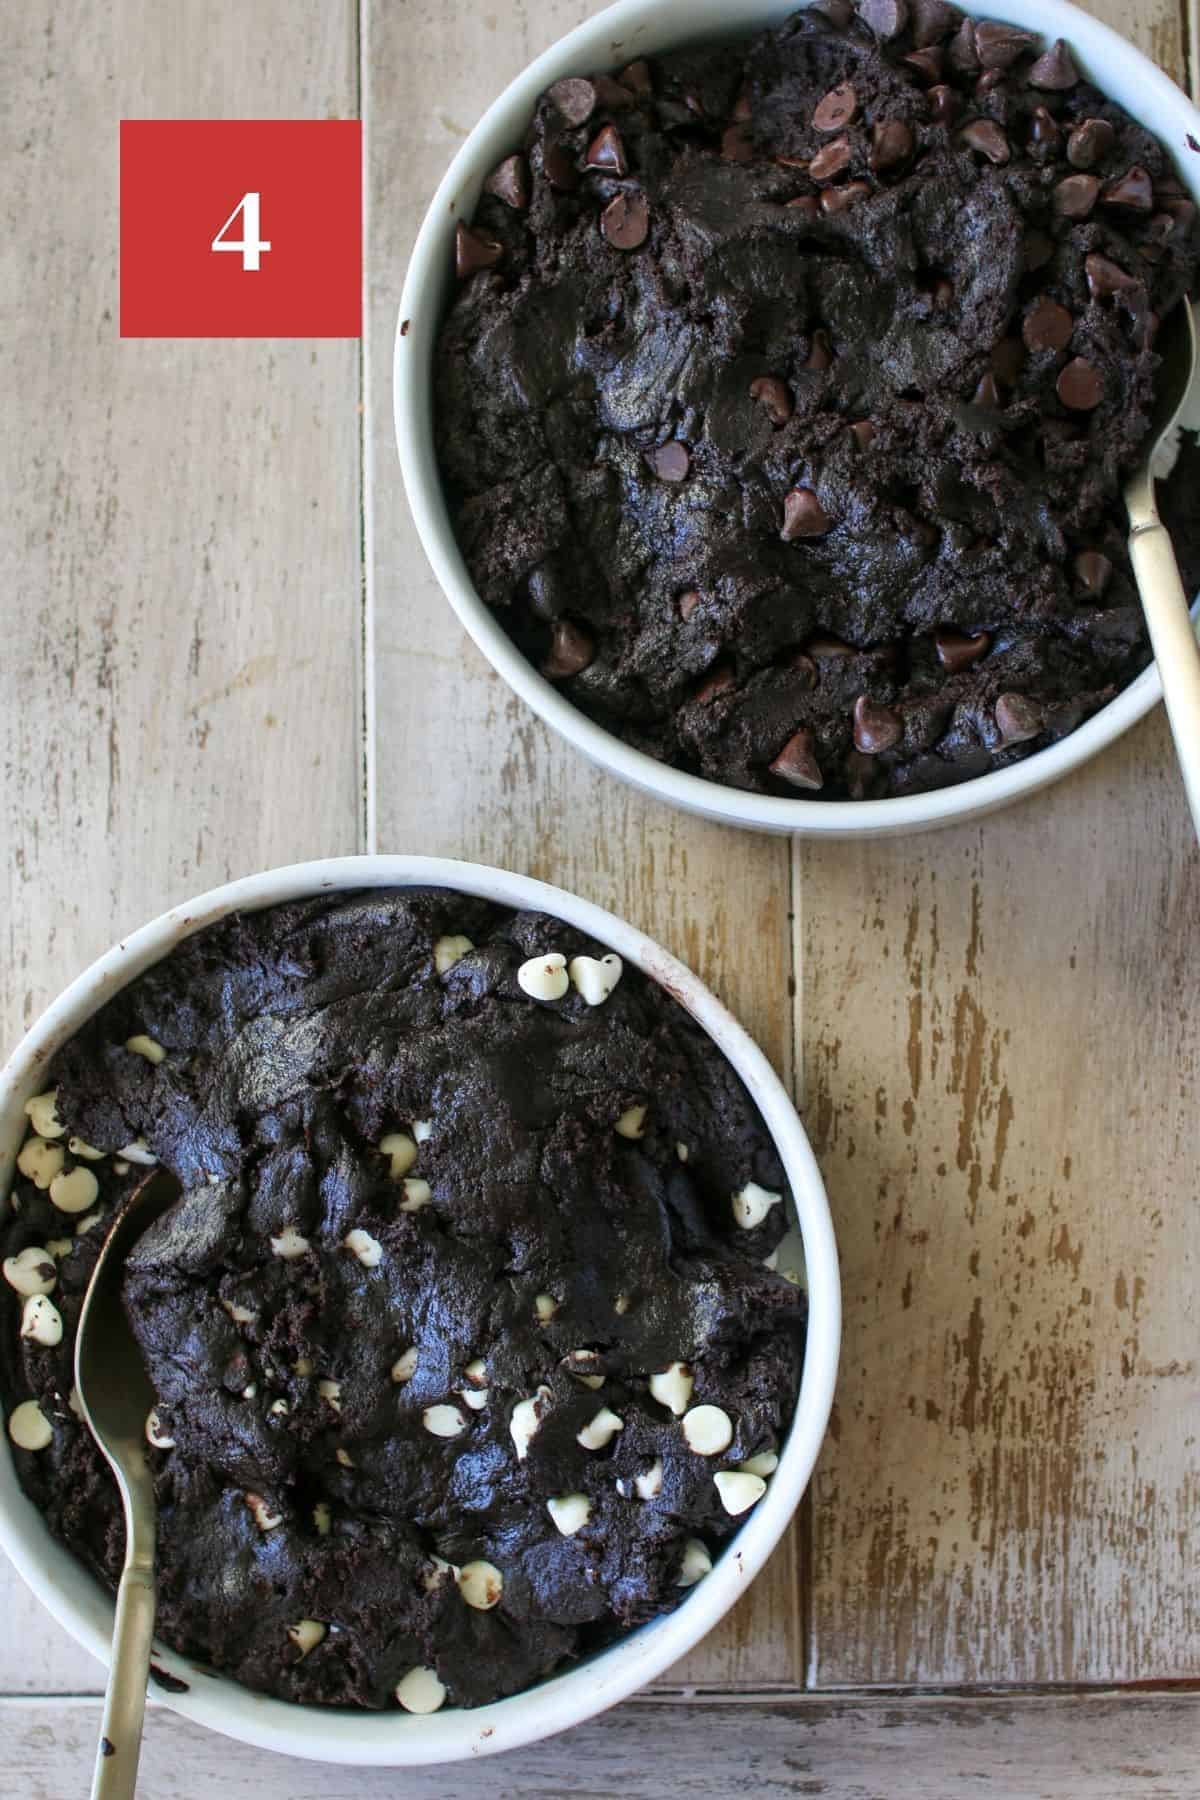 2 white bowls of dark chocolate cookie dough. One dough with white chocolate chips and one dough with semi-sweet chocolate chips. Each bowl has a gold spoon in it and the bowls are on a wood plank background.  In the upper left corner is a dark red square with a white '4' in the center.